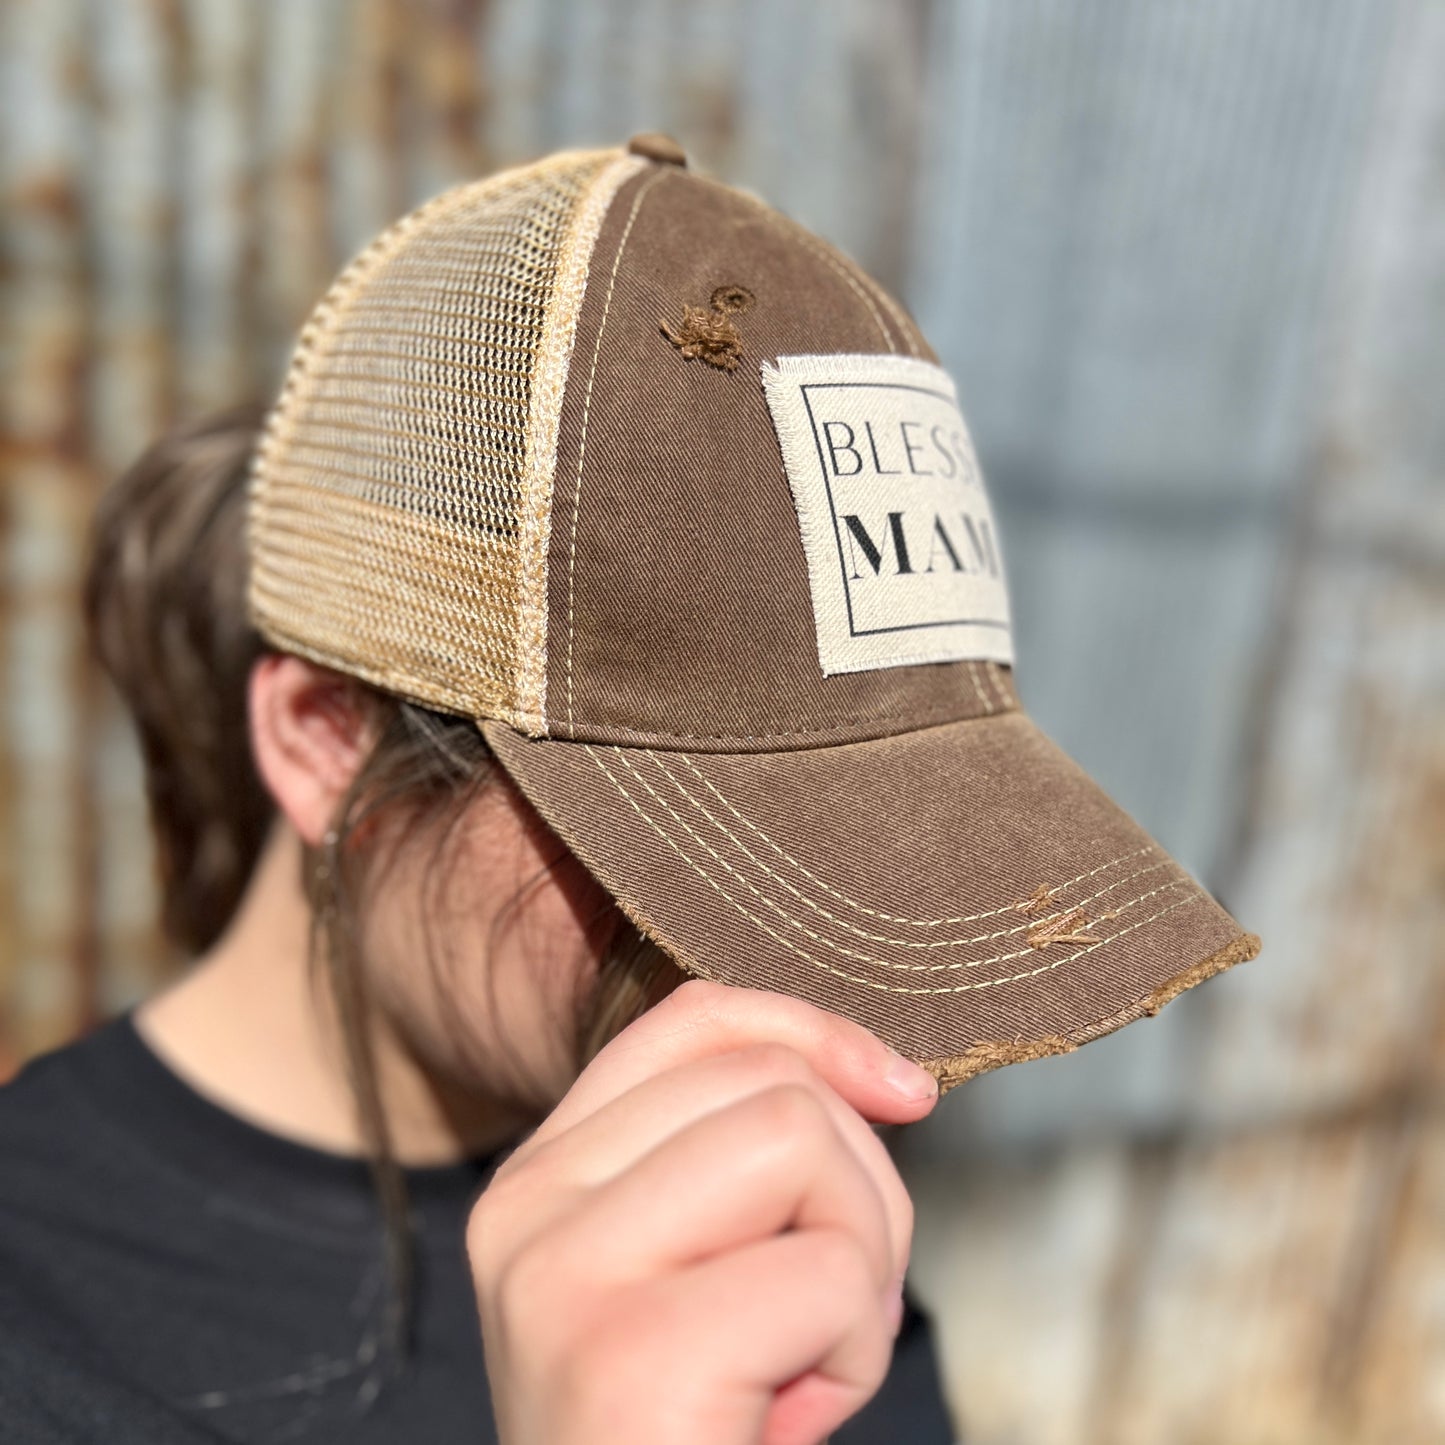 Brown Vintage Washed Blessed Mama Baseball Cap